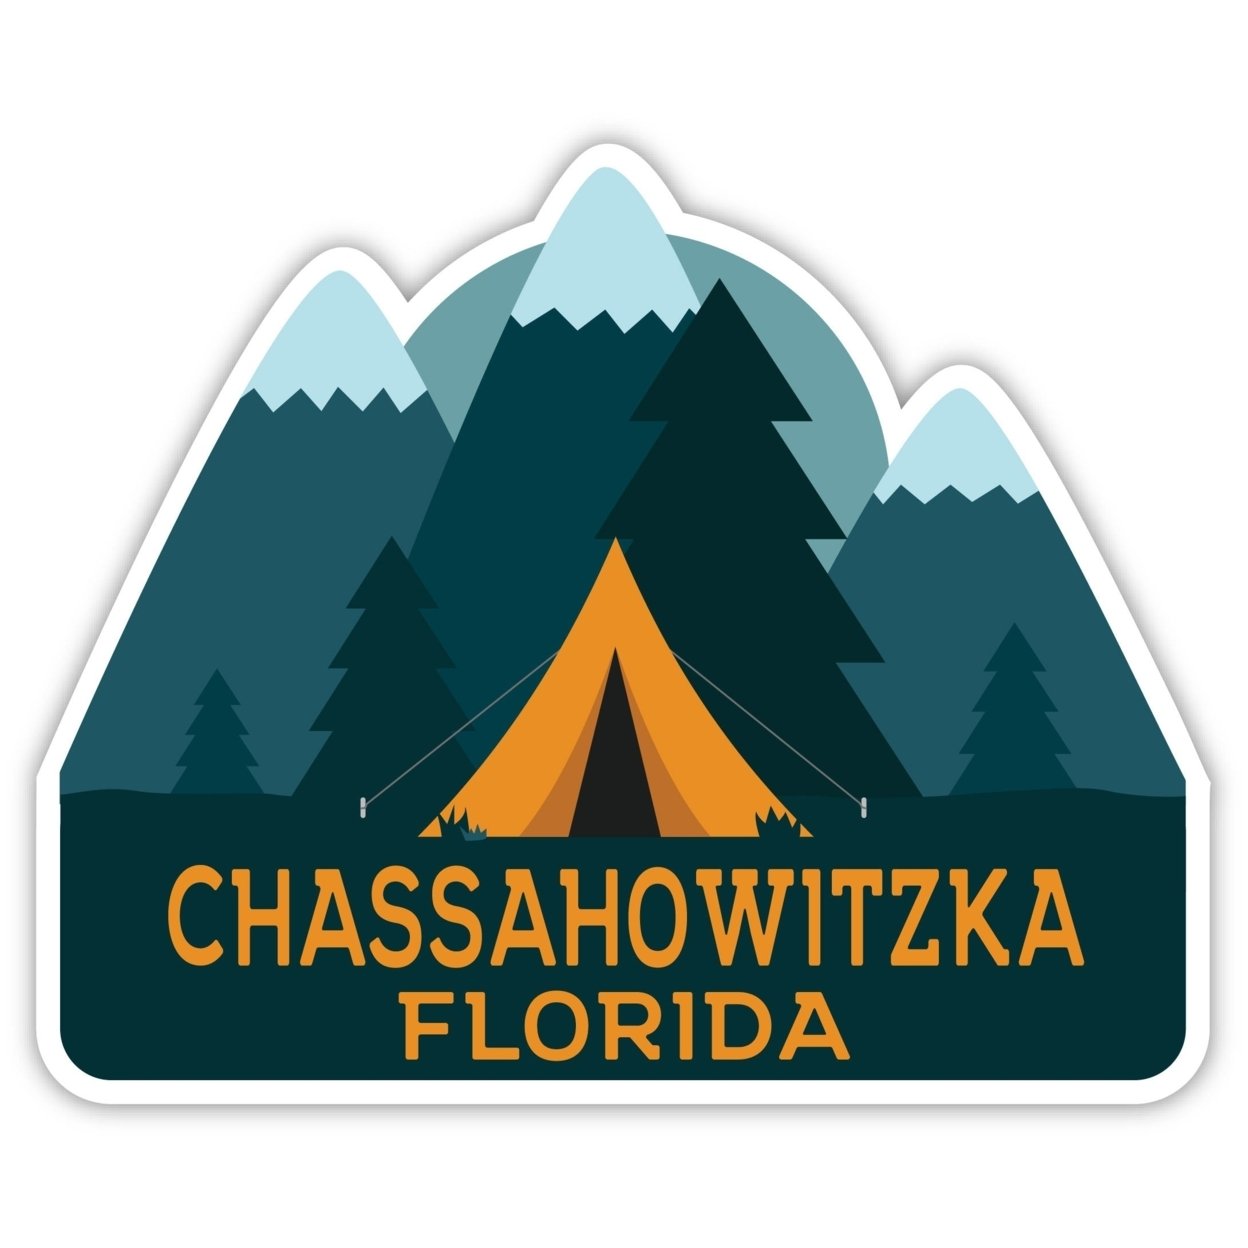 Chassahowitzka Florida Souvenir Decorative Stickers (Choose Theme And Size) - 4-Pack, 10-Inch, Tent